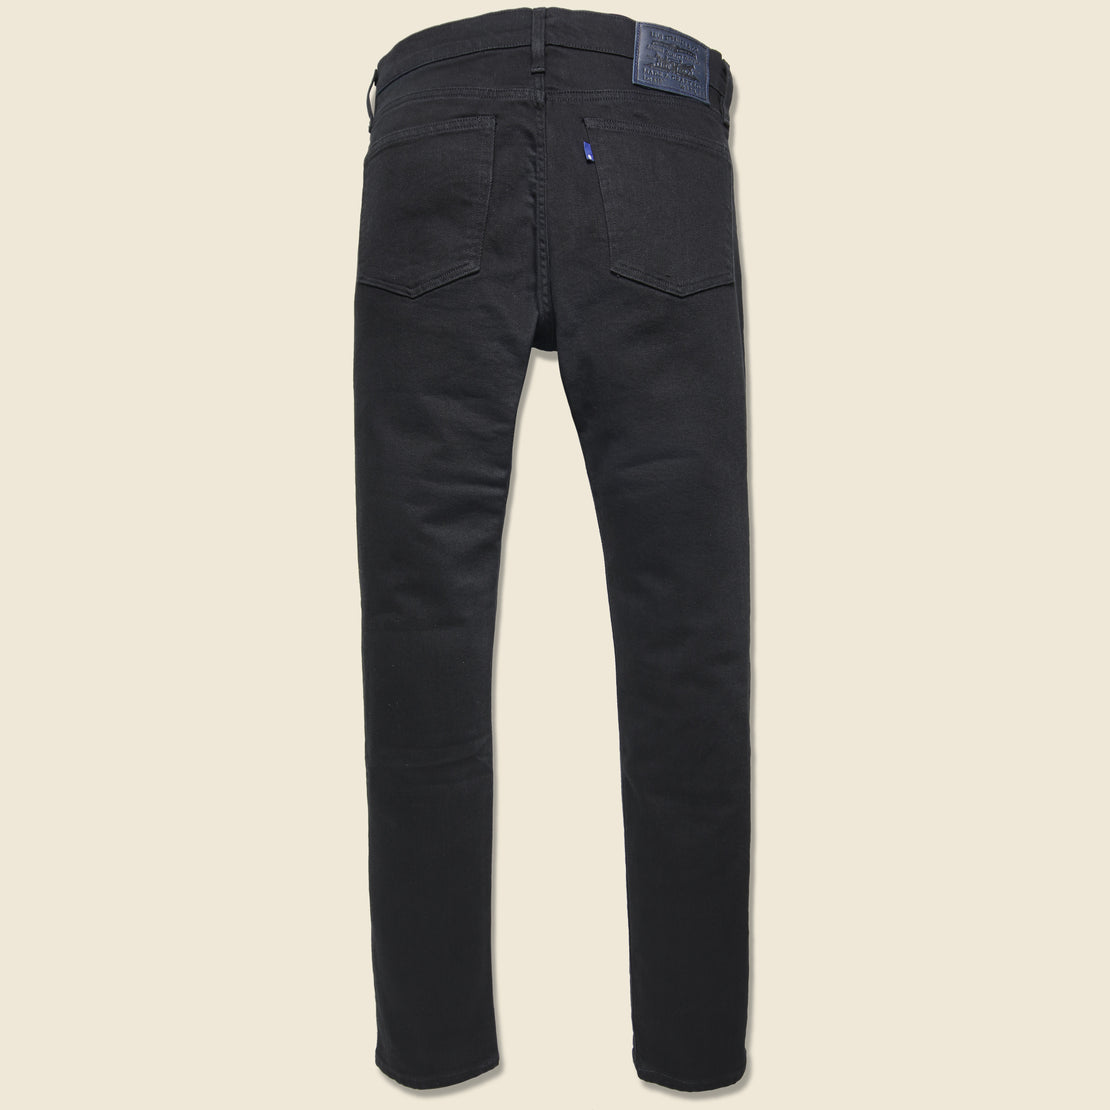 510 Jean - Black Rinse - Levis Made & Crafted - STAG Provisions - Pants - Denim